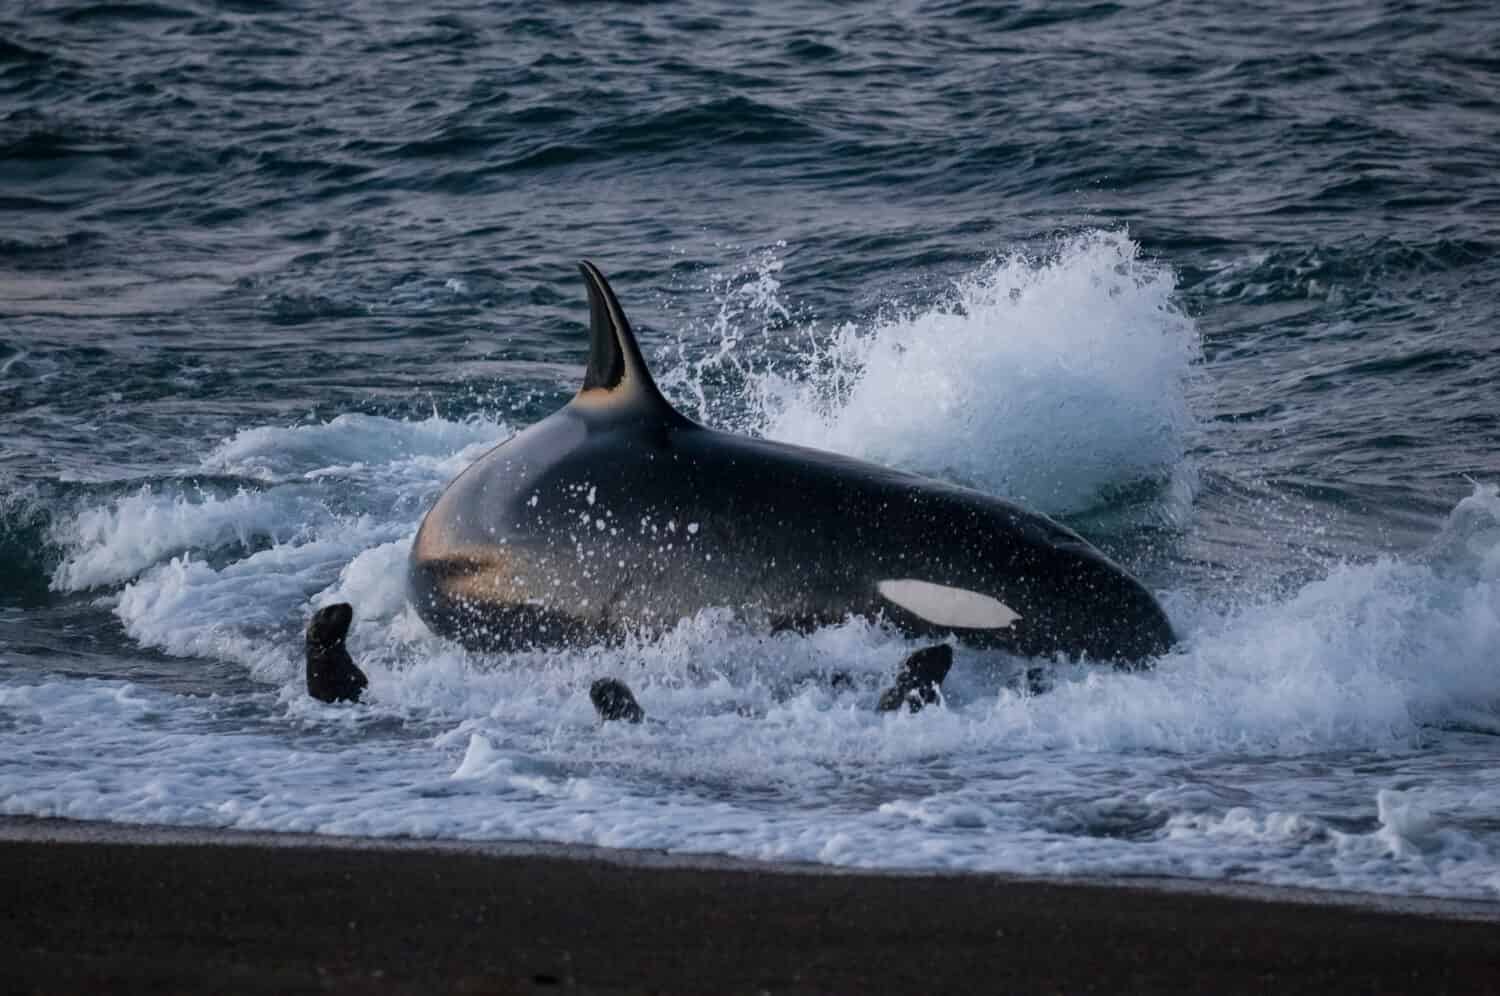 Killer whale hunting sea lions on the patagonian coast, Patagonia, Argentina